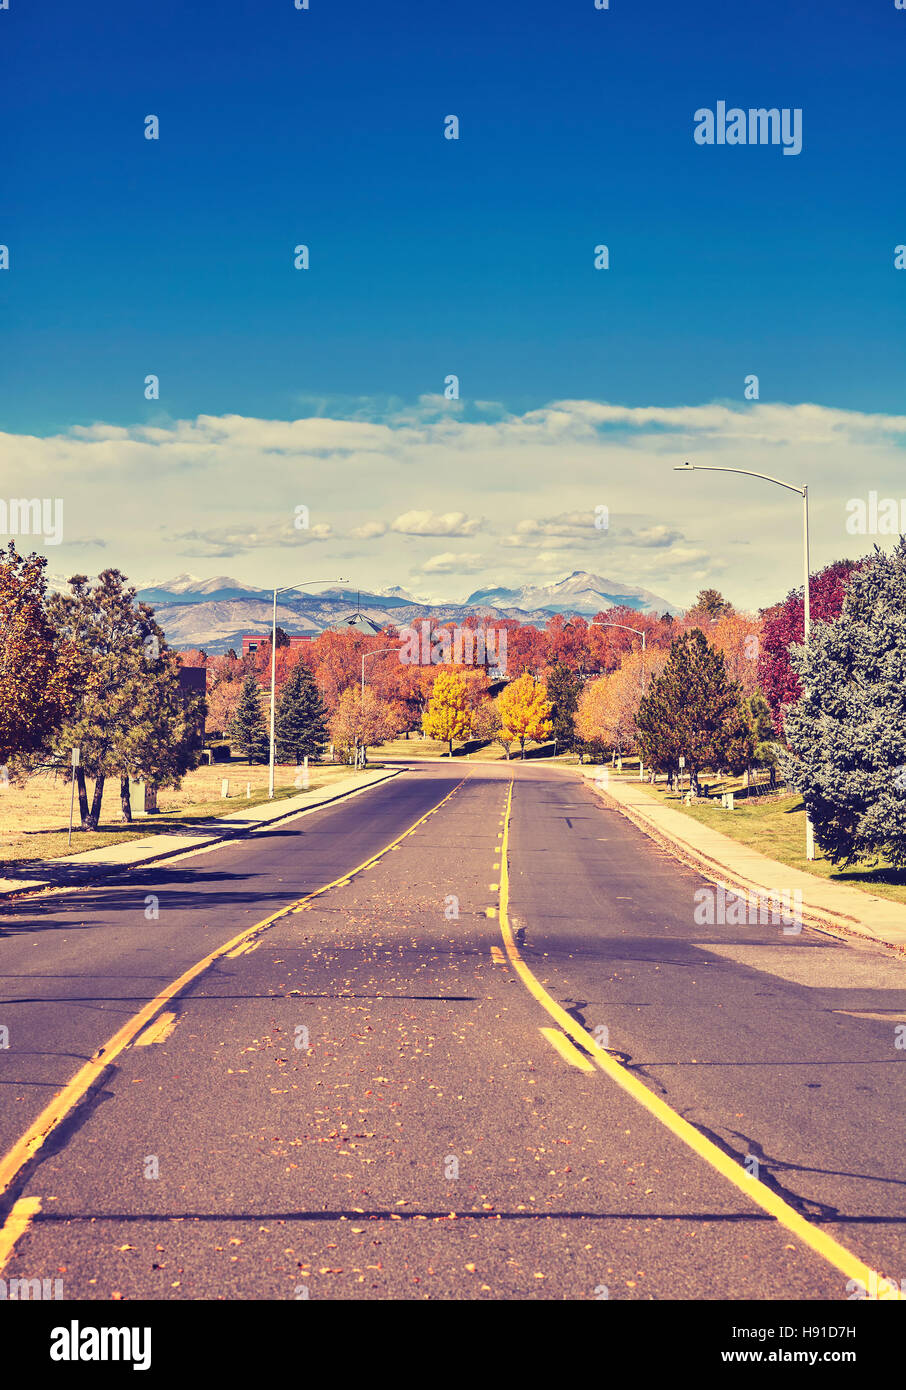 Retro stylized photo of an autumn road with Rocky Mountains in distance, Colorado, USA. Stock Photo